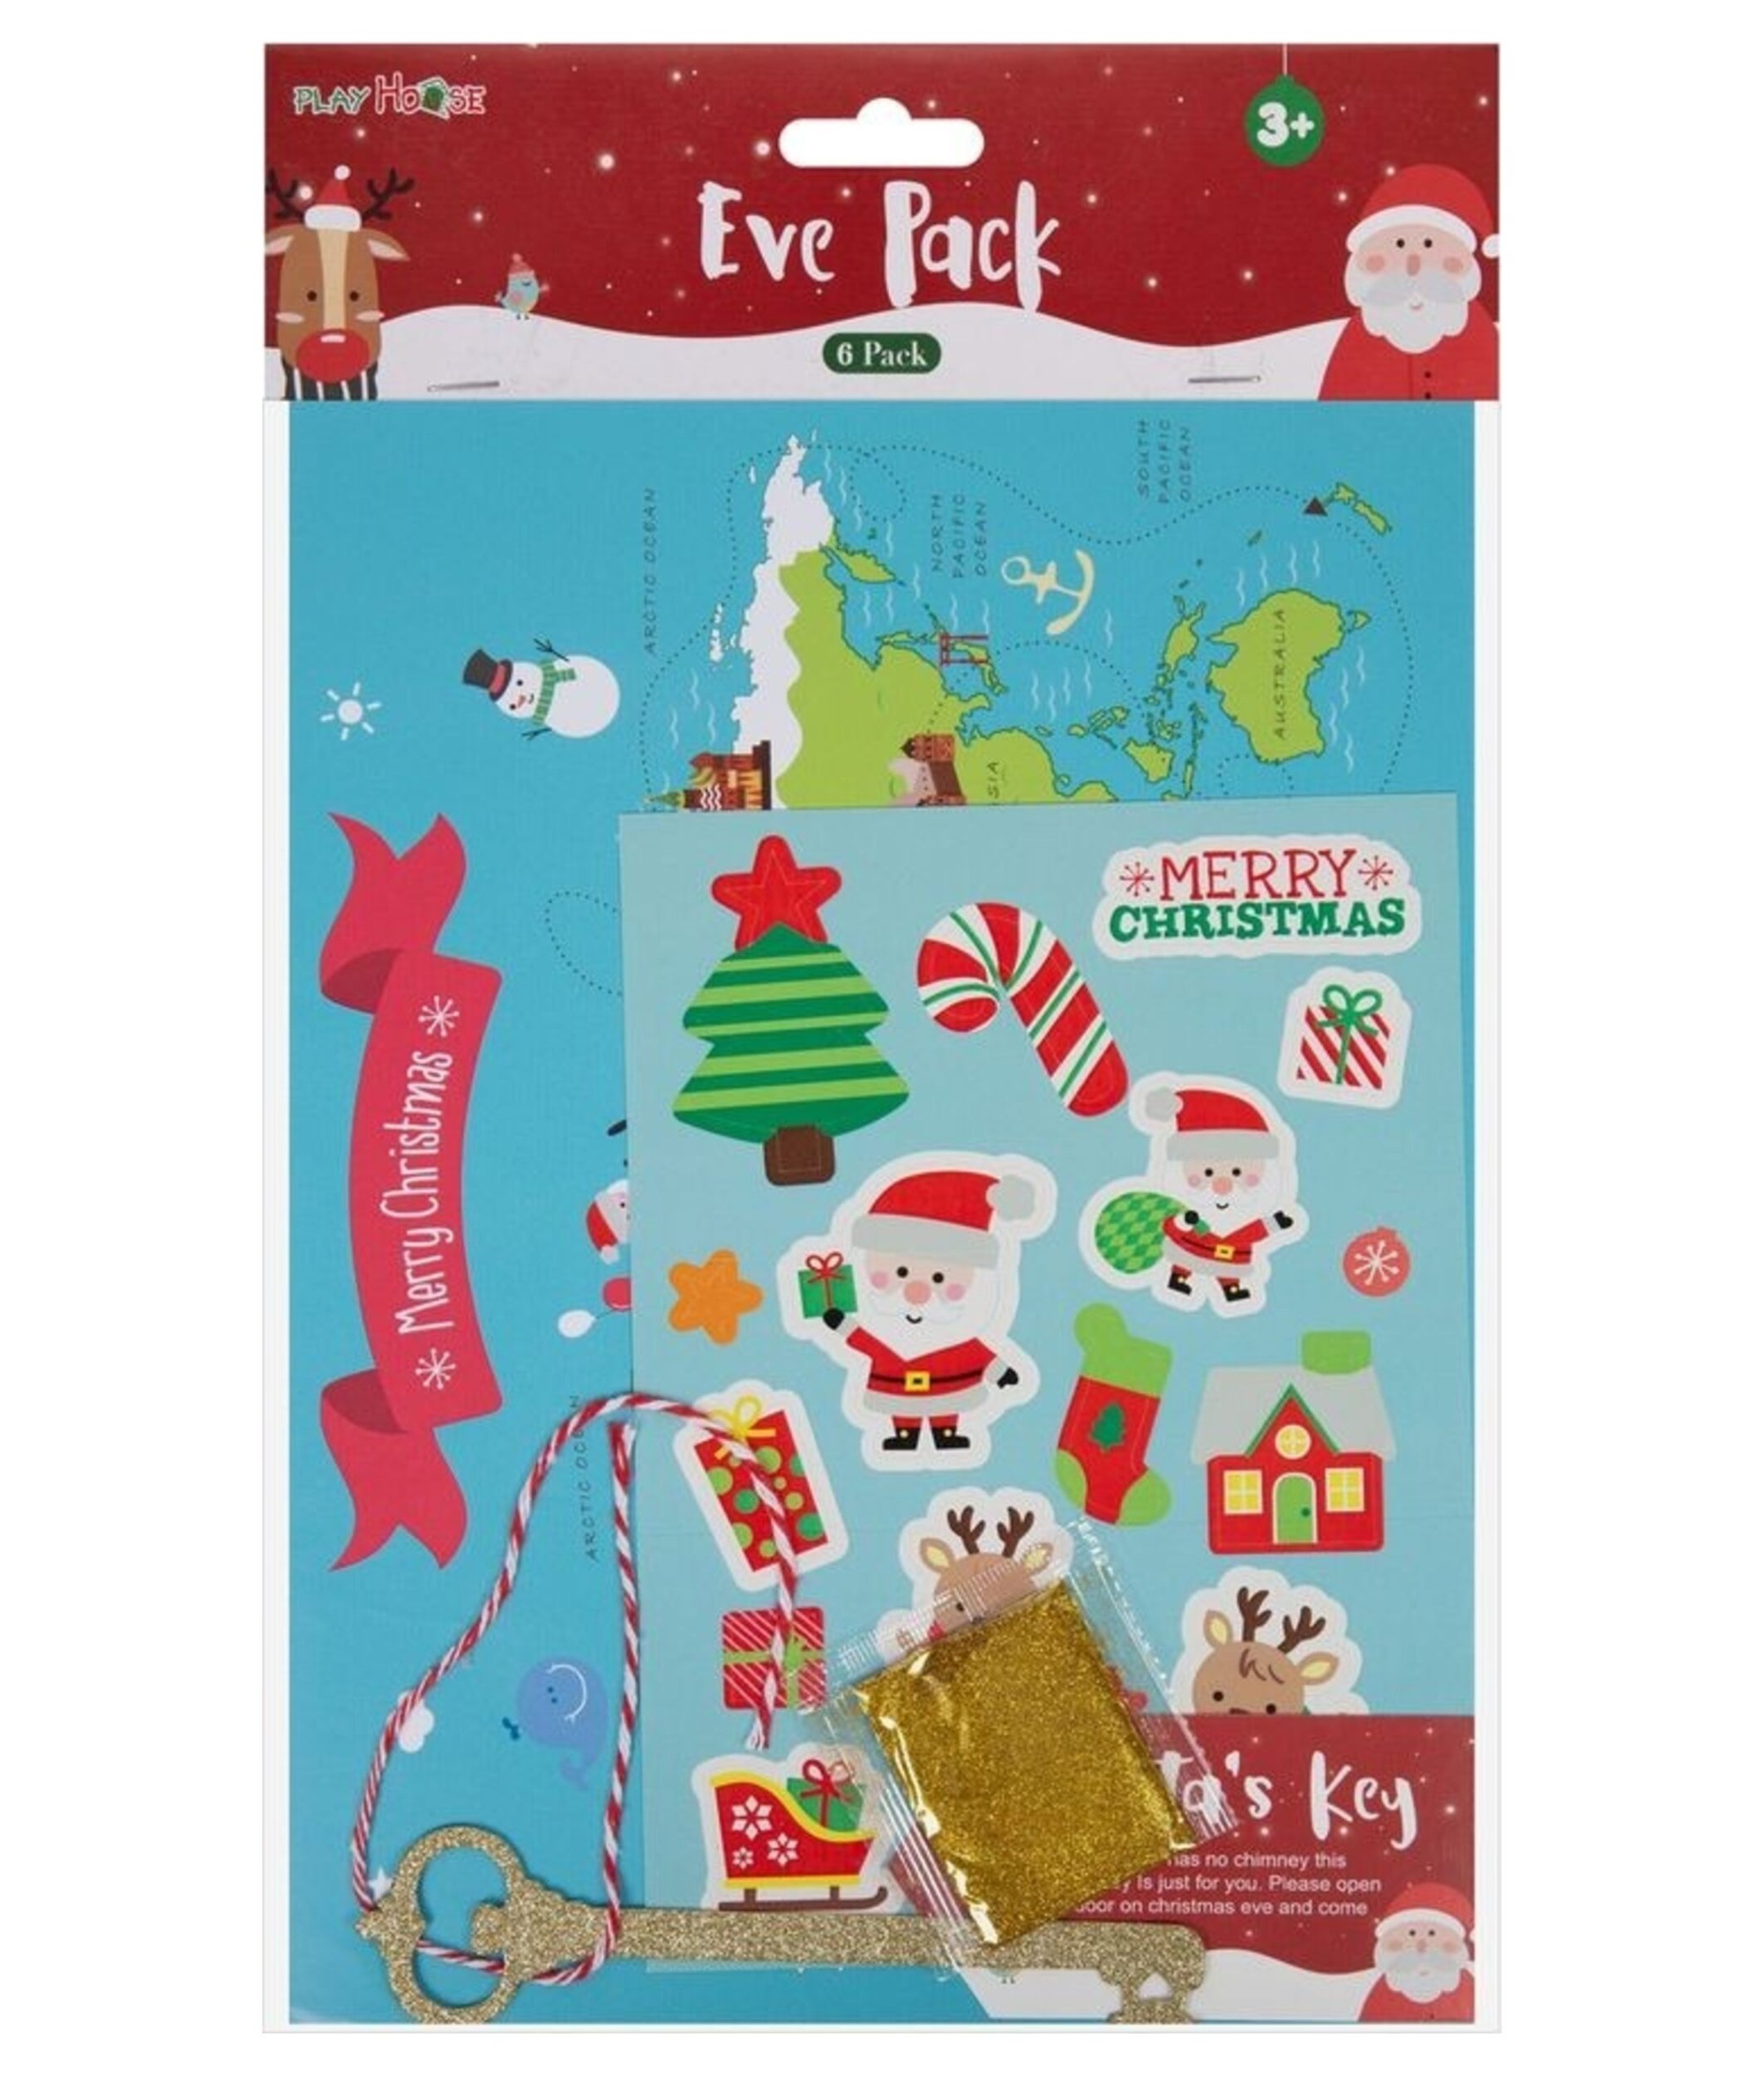 Christmas Eve Kids Fun Pack | Cancer Research UK Online Shop